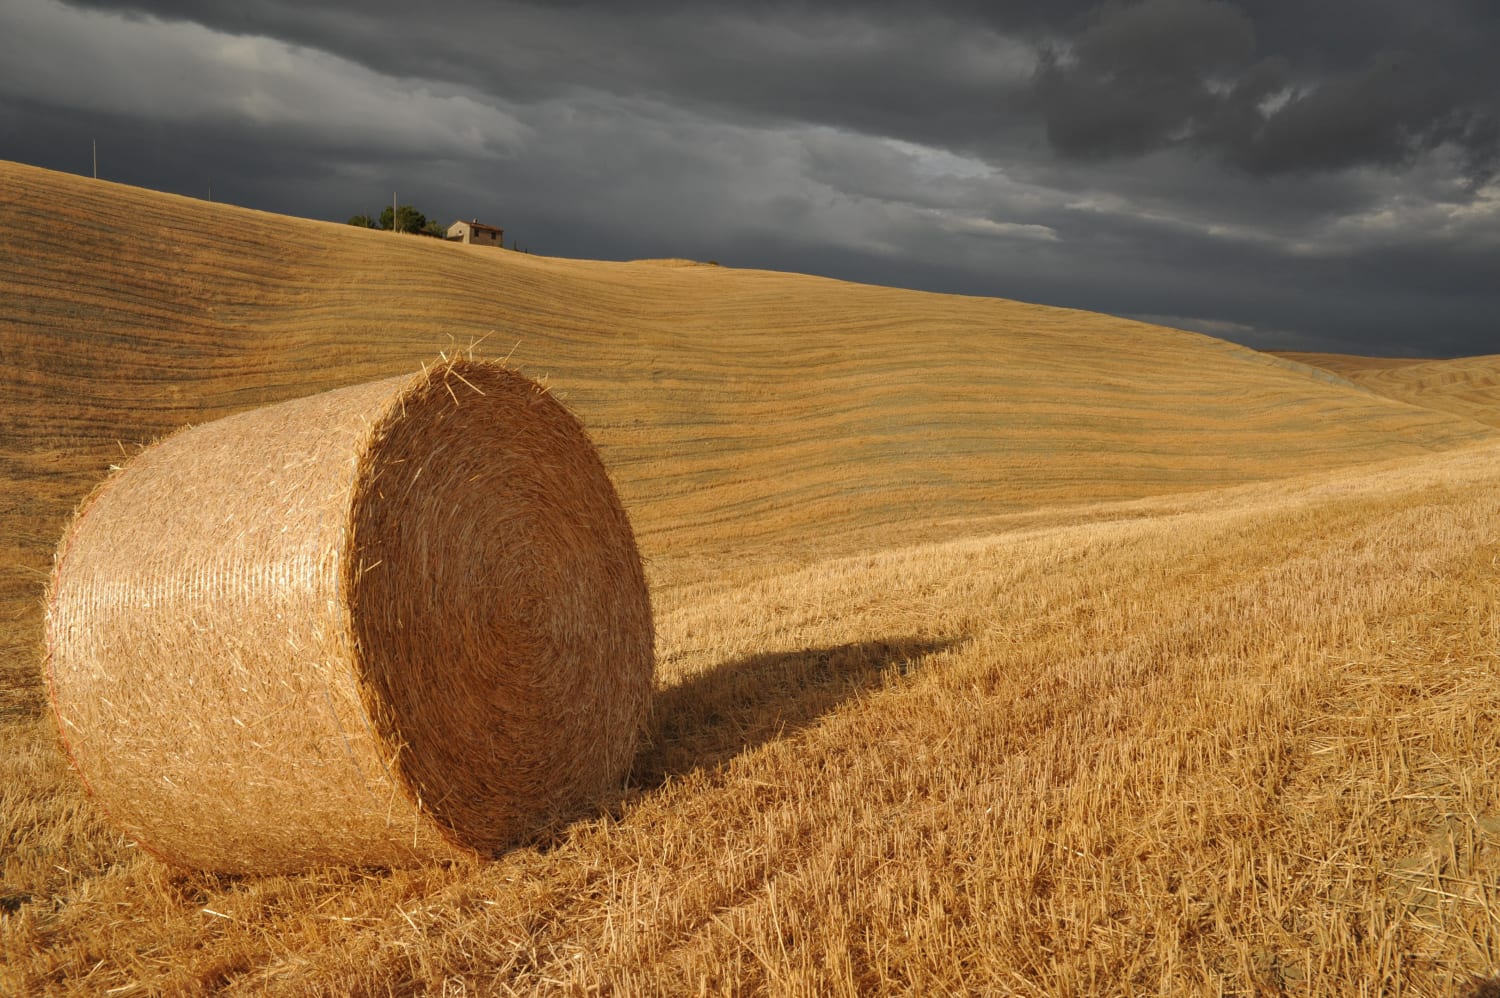 Bale of Straw in Tuscany